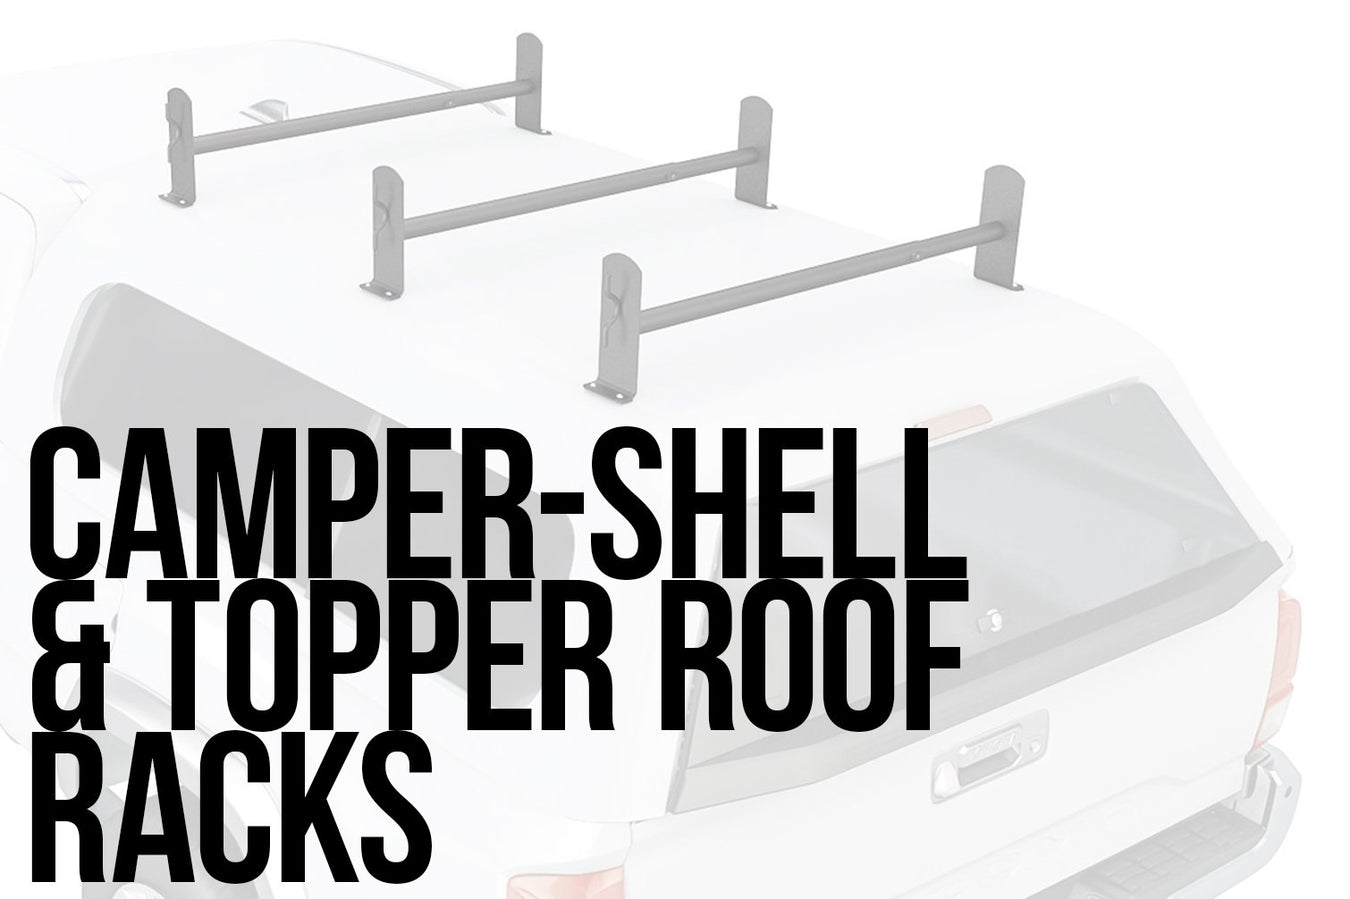 Camper-shell and Topper roof racks